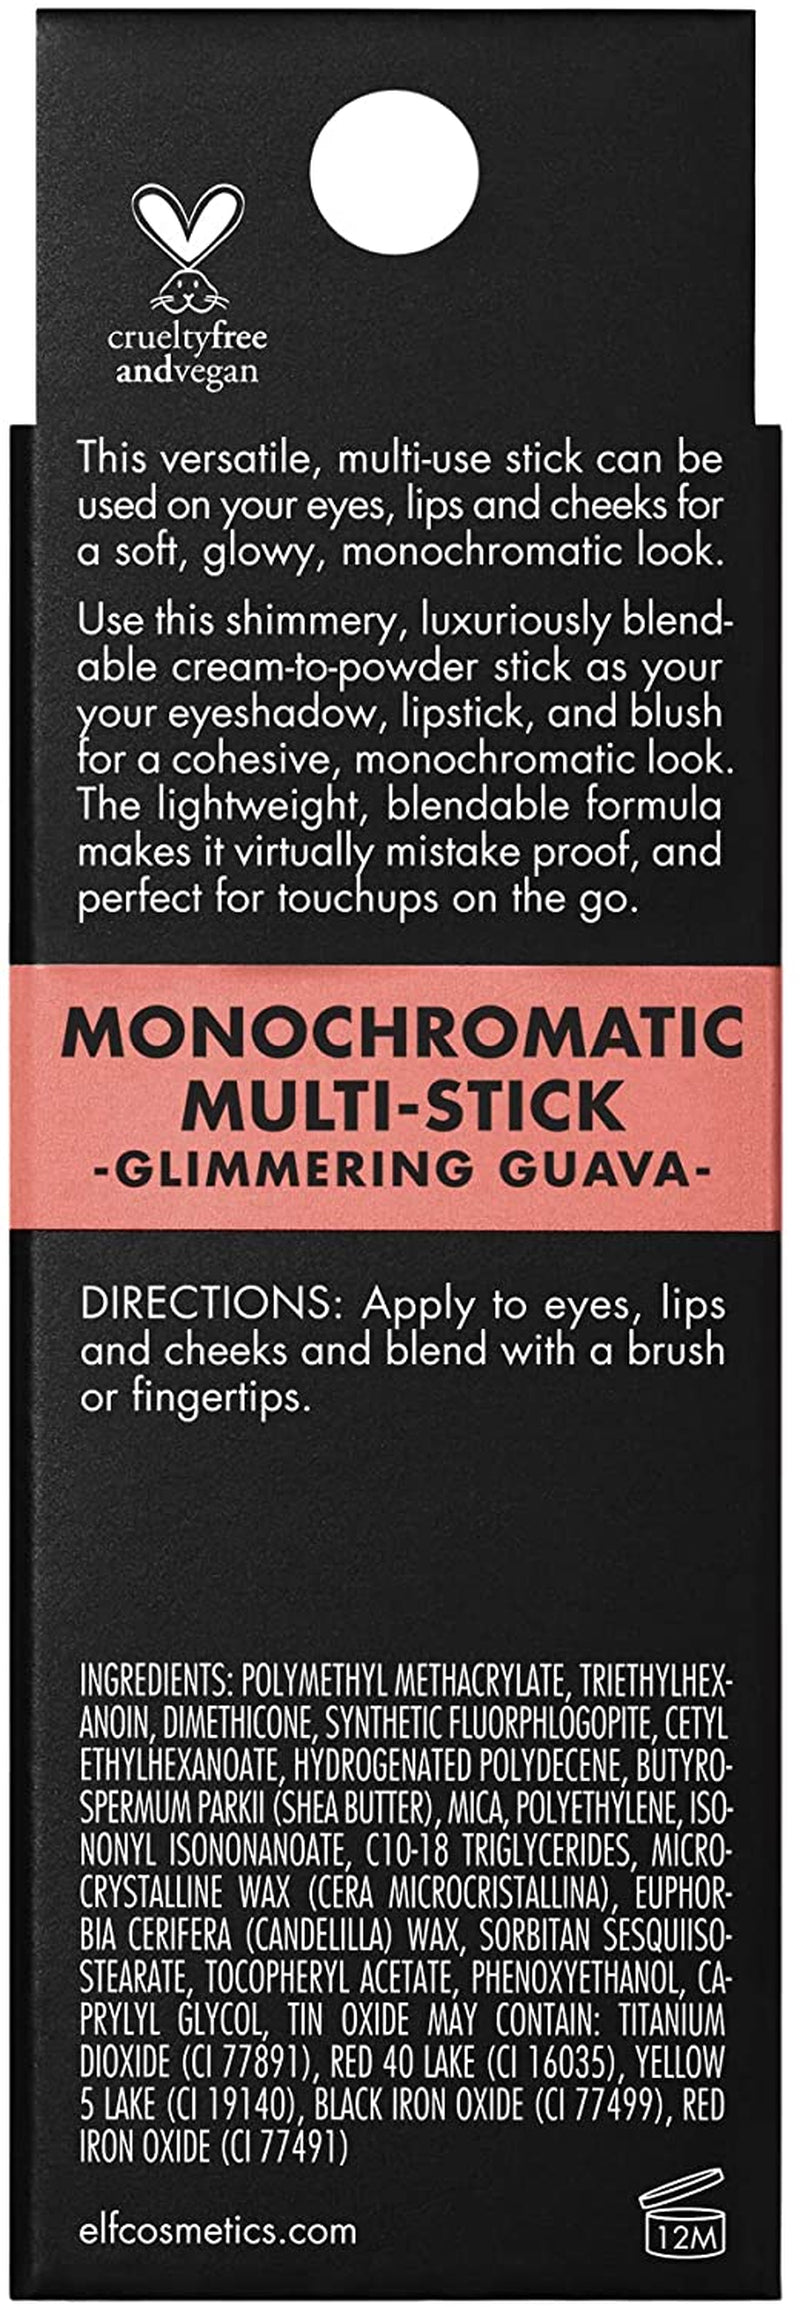 e.l.f. Monochromatic Multi-Stick Blush, Creamy, Lightweight, Versatile, Luxurious, Adds Shimmer, Easy to Use on the Go, Blends Effortlessly, Glimmering Guava 4.4G